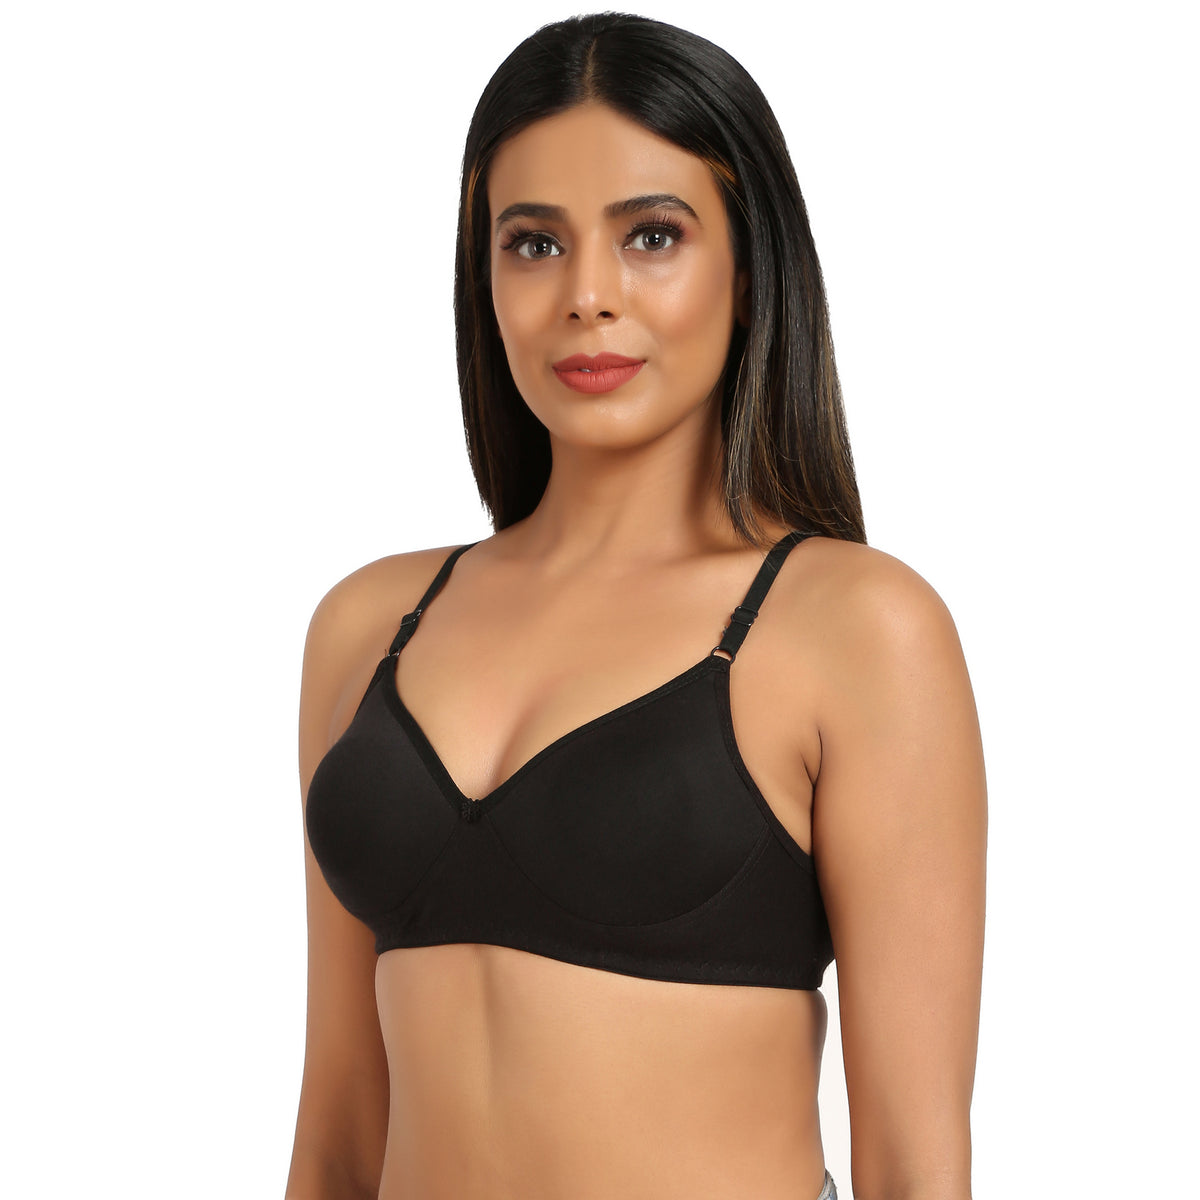 Shyaway 38C Black Push Up Bra in Pollachi - Dealers, Manufacturers &  Suppliers - Justdial